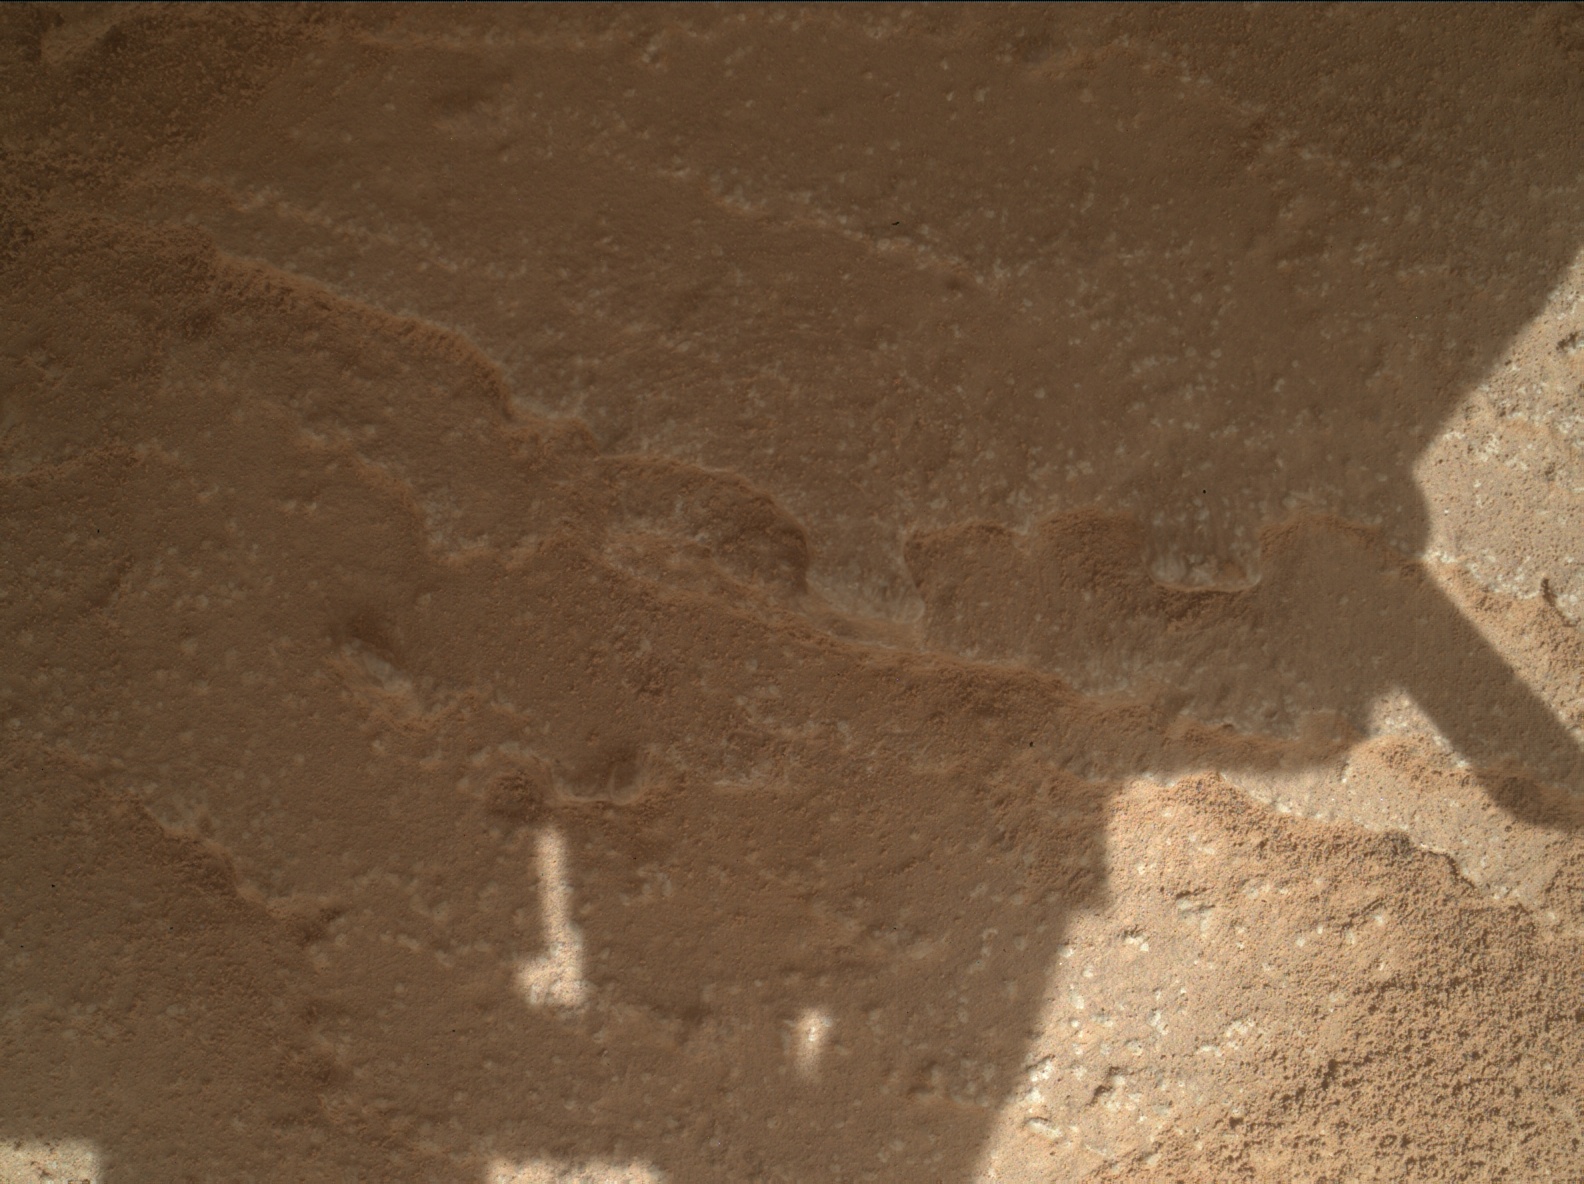 Nasa's Mars rover Curiosity acquired this image using its Mars Hand Lens Imager (MAHLI) on Sol 3887